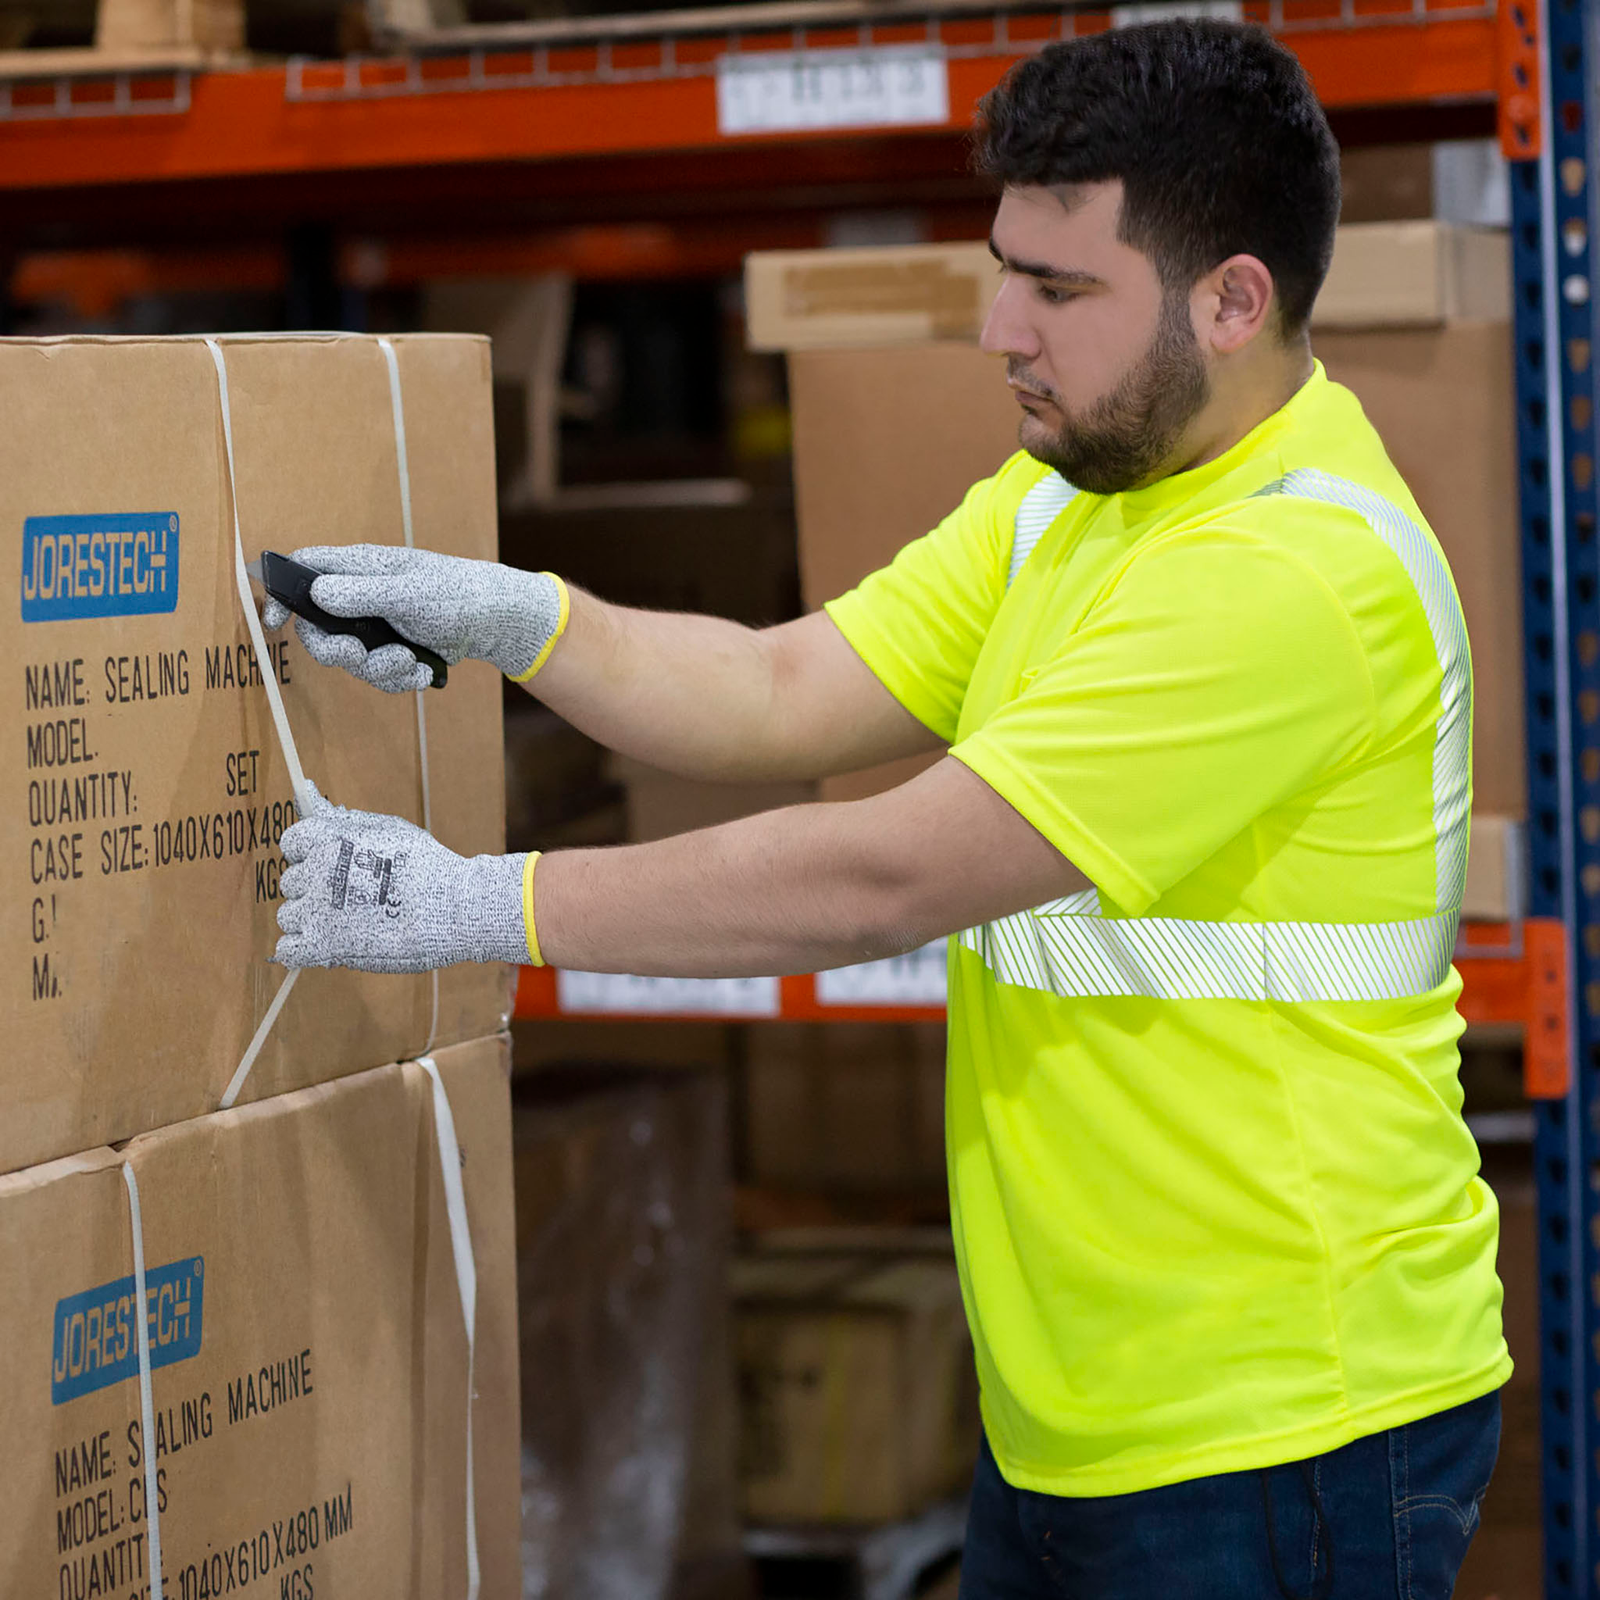 Image of a man wearing a JORESTECH yellow/lime safety shirt while removing strap form boxes while working in a warehouse